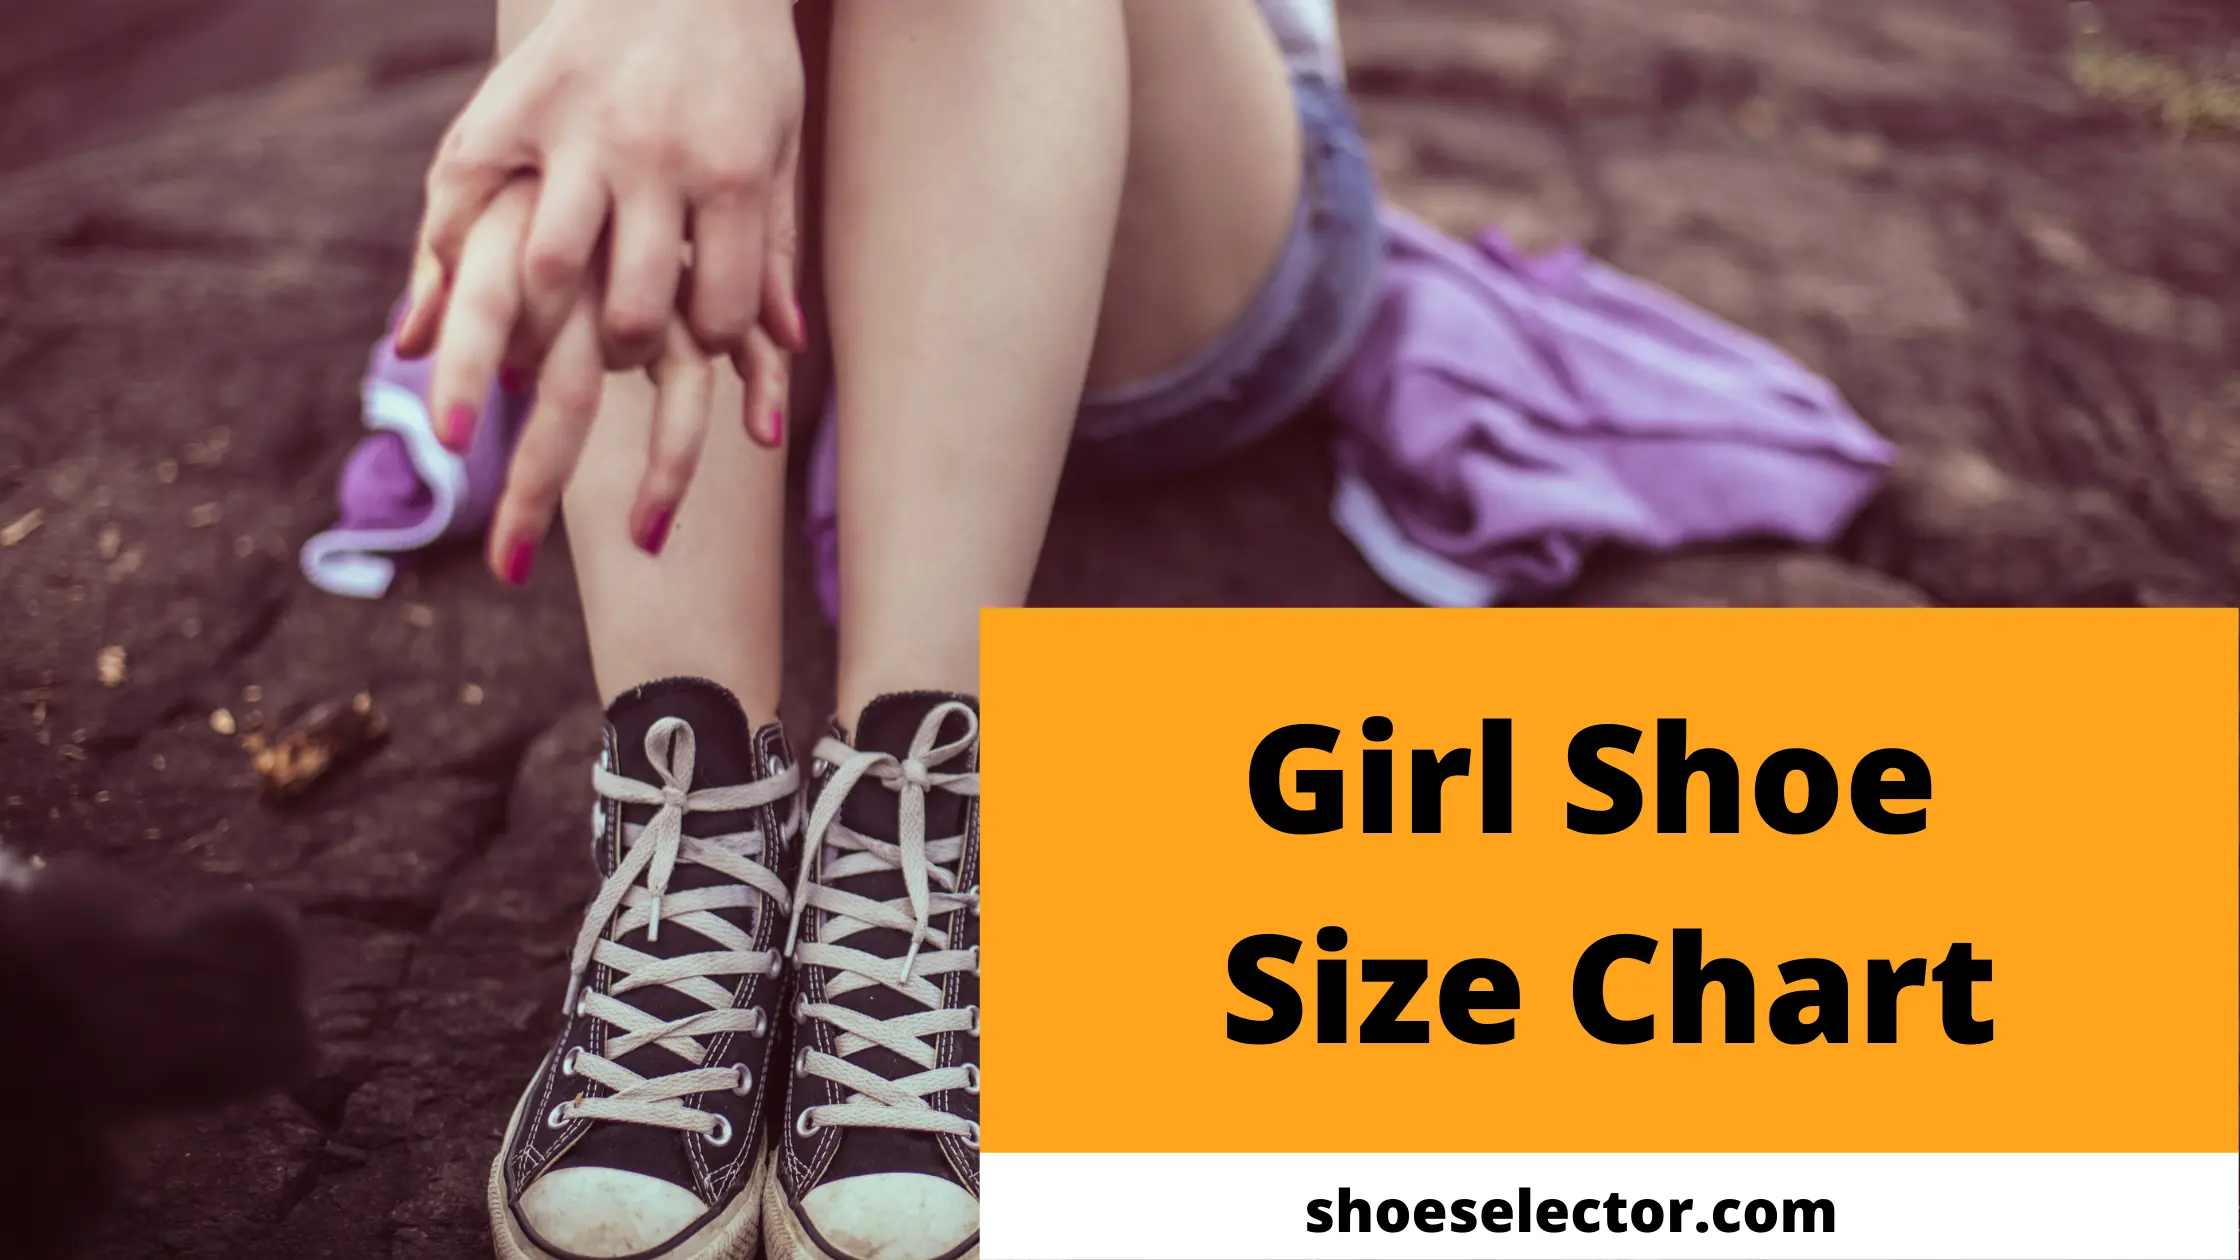 Girls Shoe Size Chart: Finding the Perfect Fit